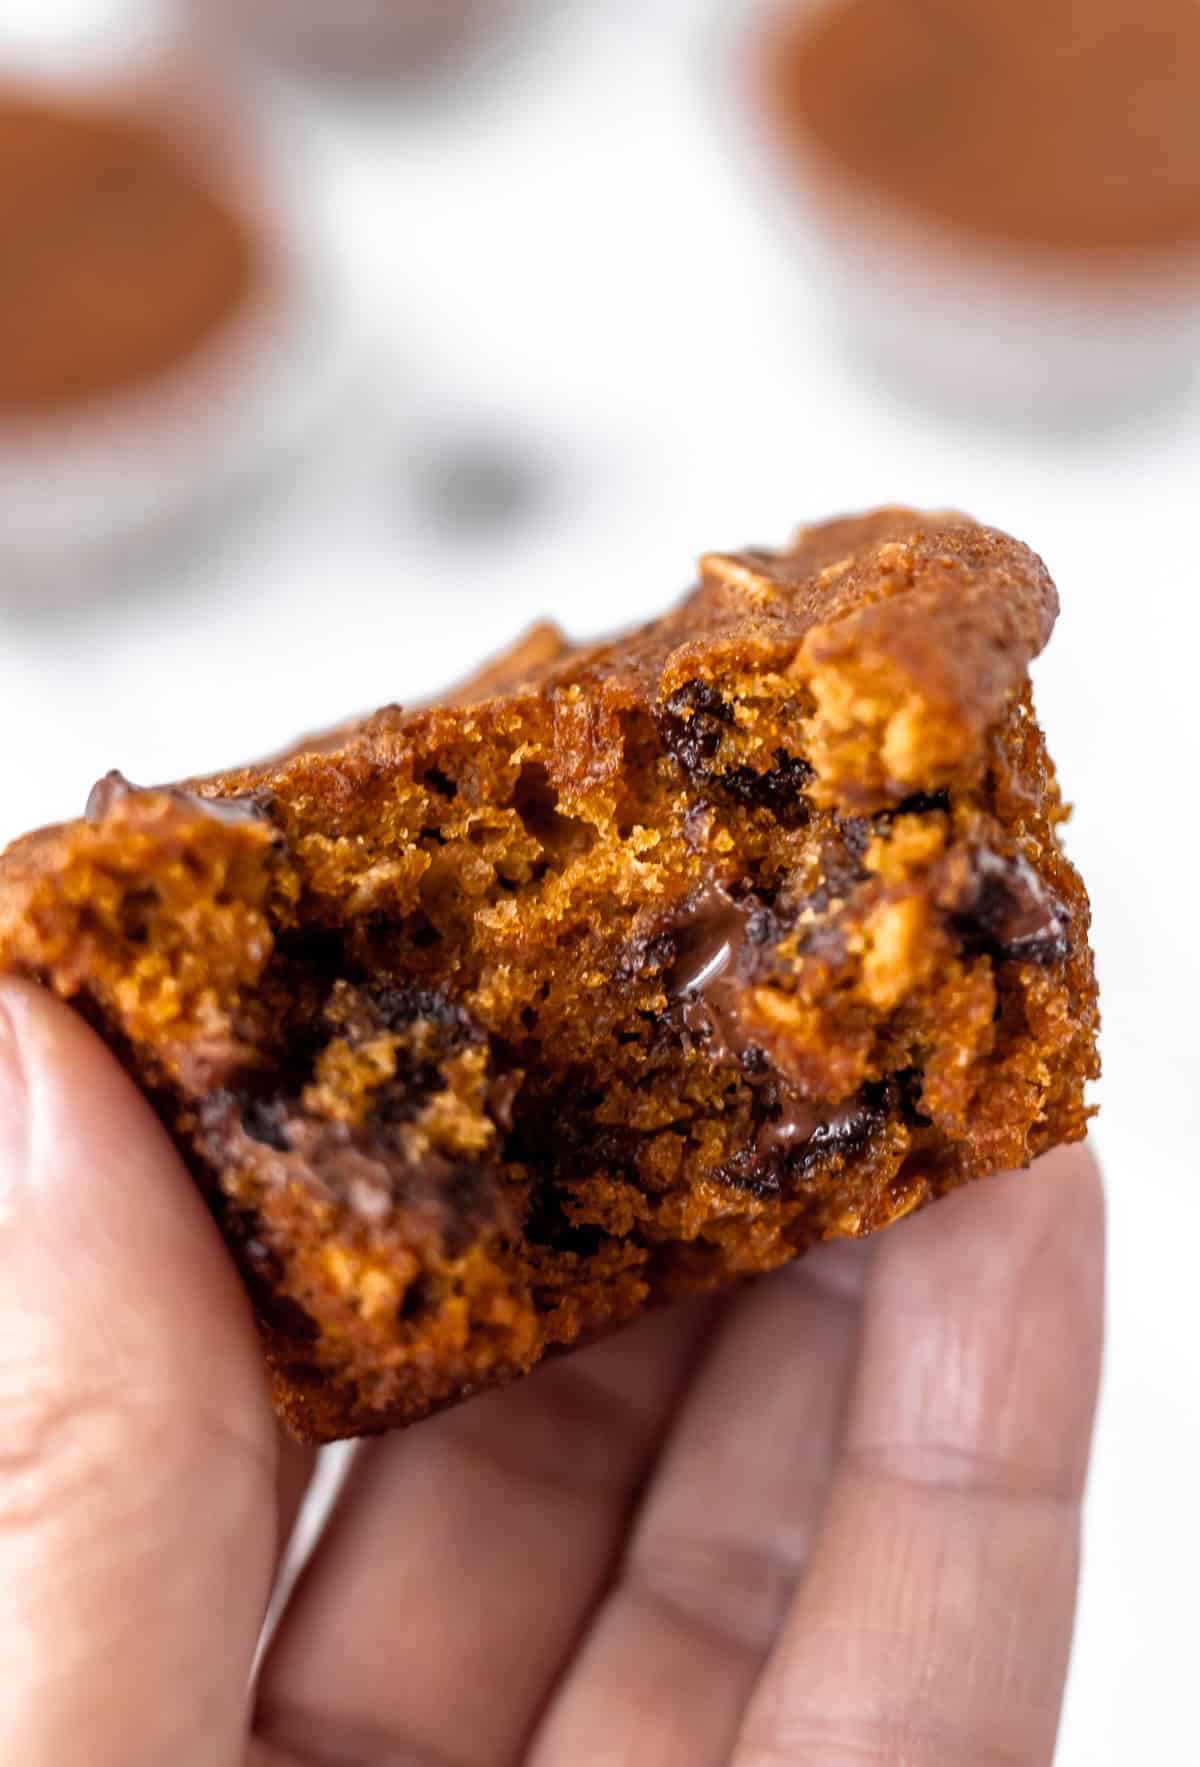 A hand holding up a pumpkin chocolate chip muffin with a bite taken out of it.